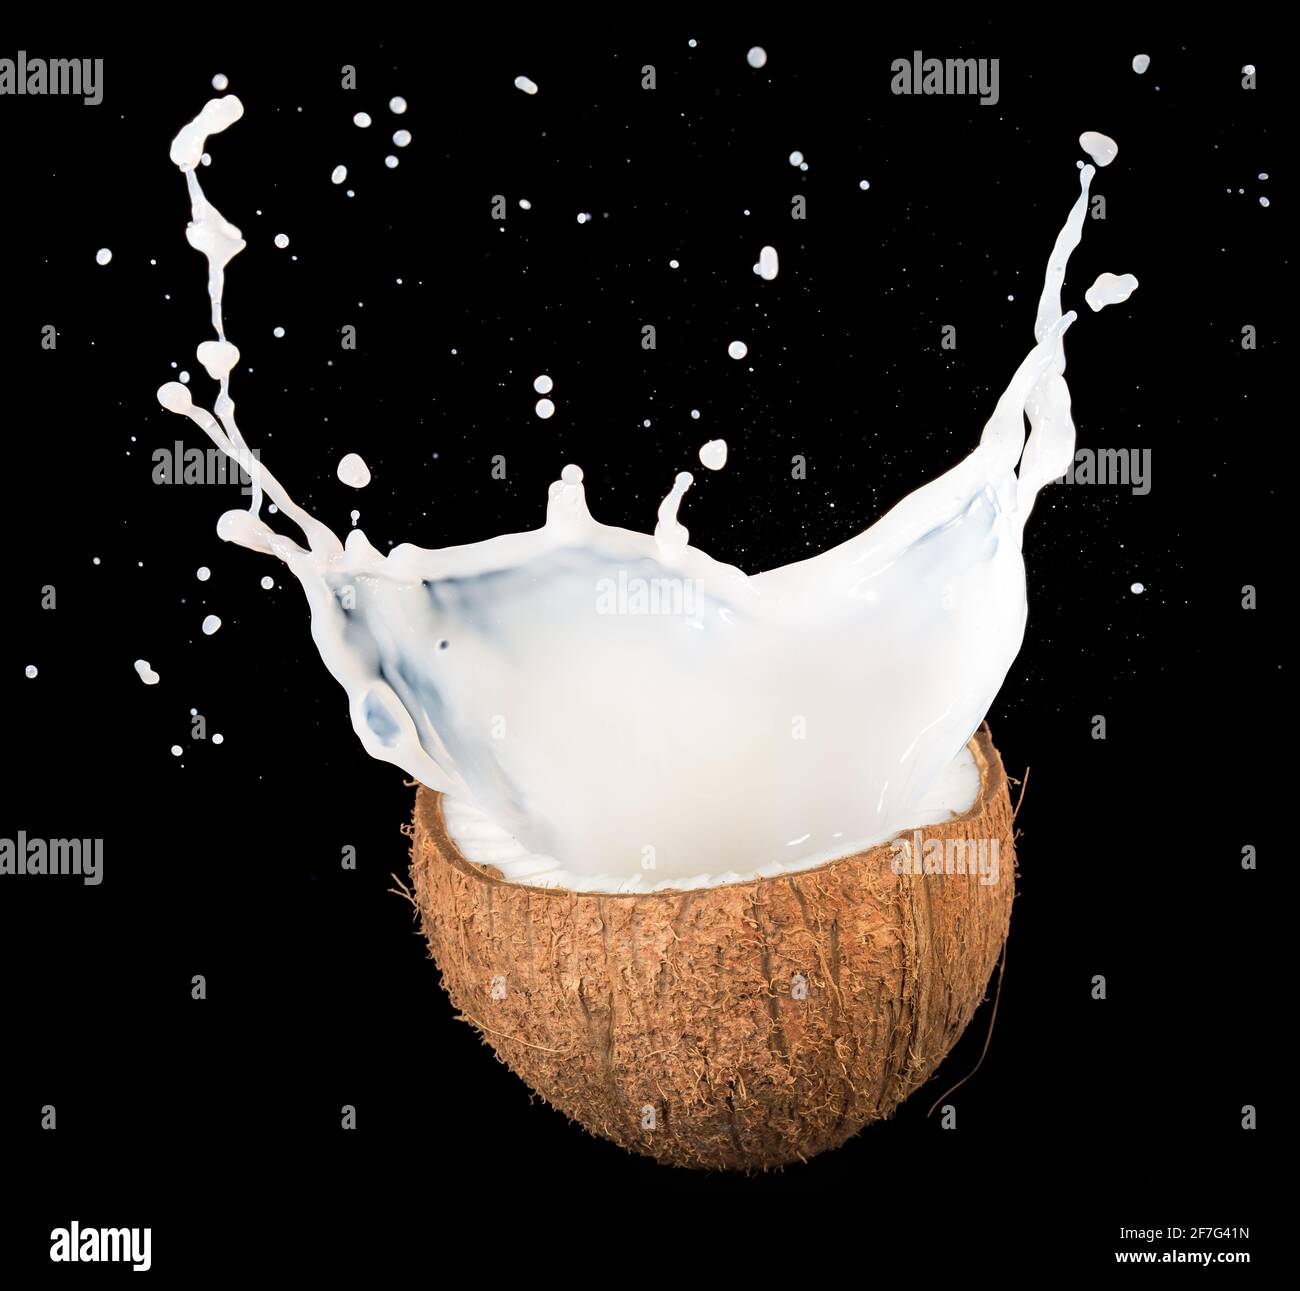 coconut milk spilling out of half nut isolated on black Stock Photo